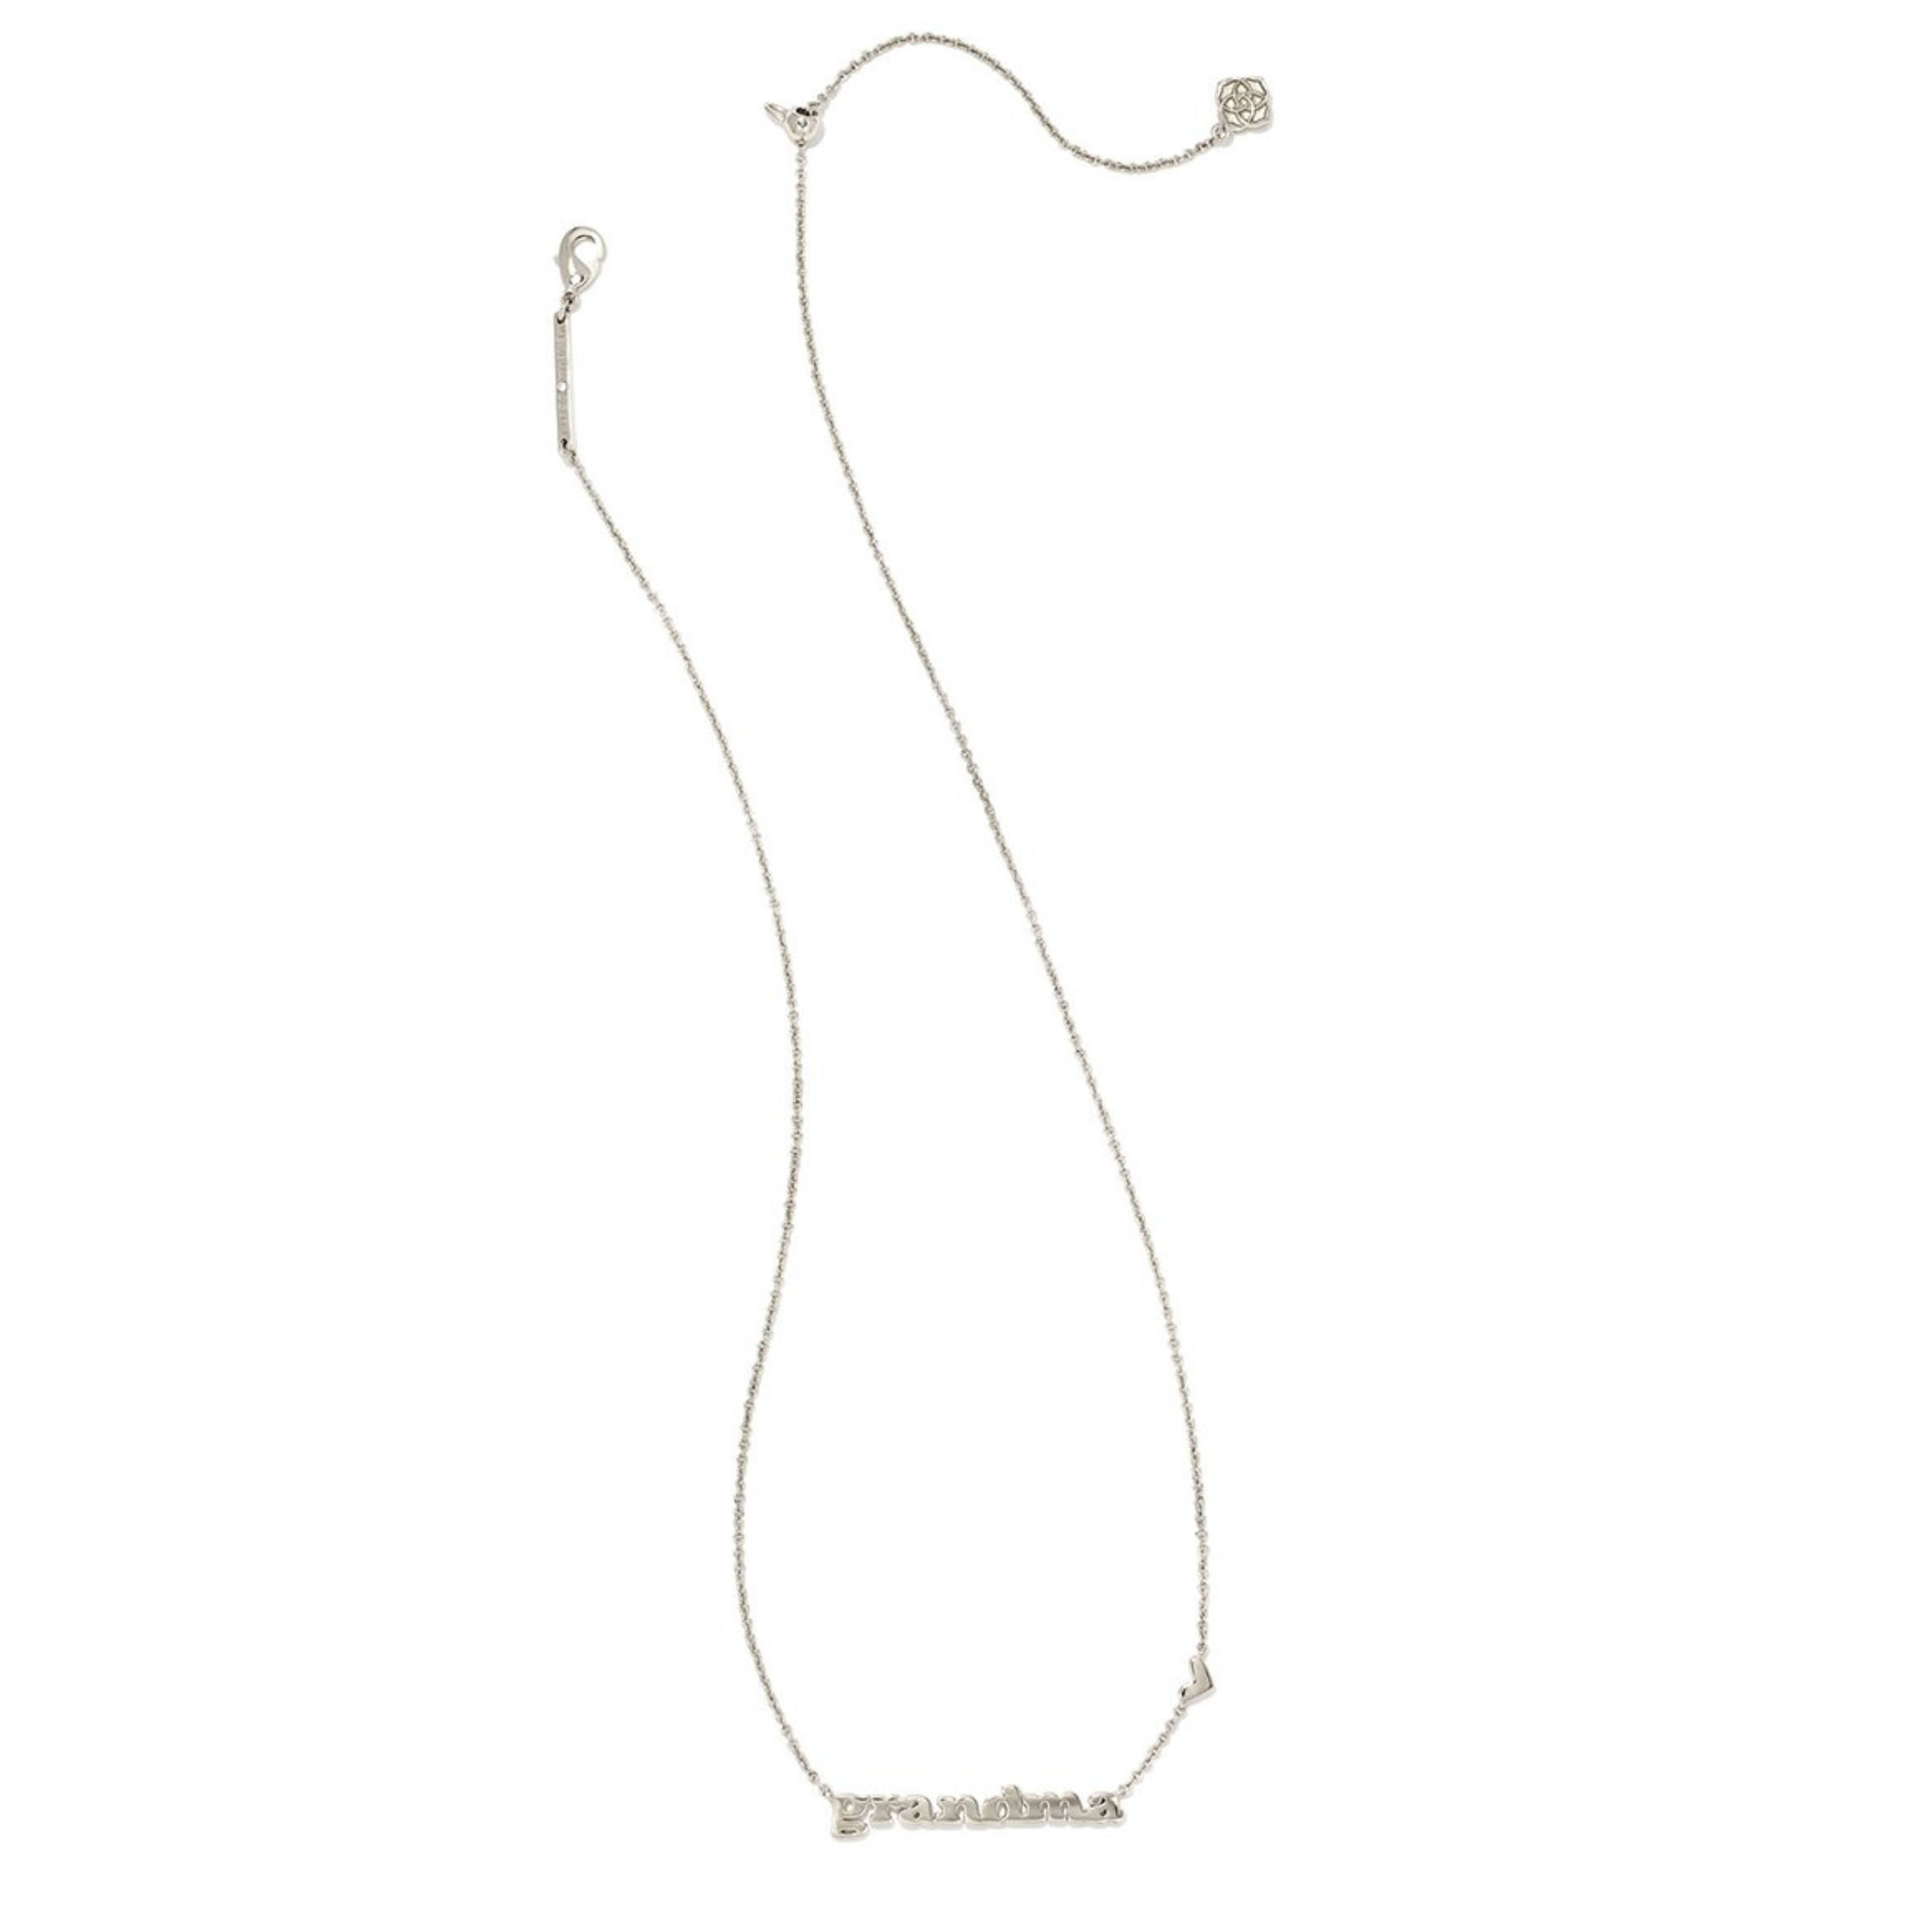 Kendra Scott | Kendra Scott Grandma Pendant Necklace in Silver - Giddy Up Glamour Boutique